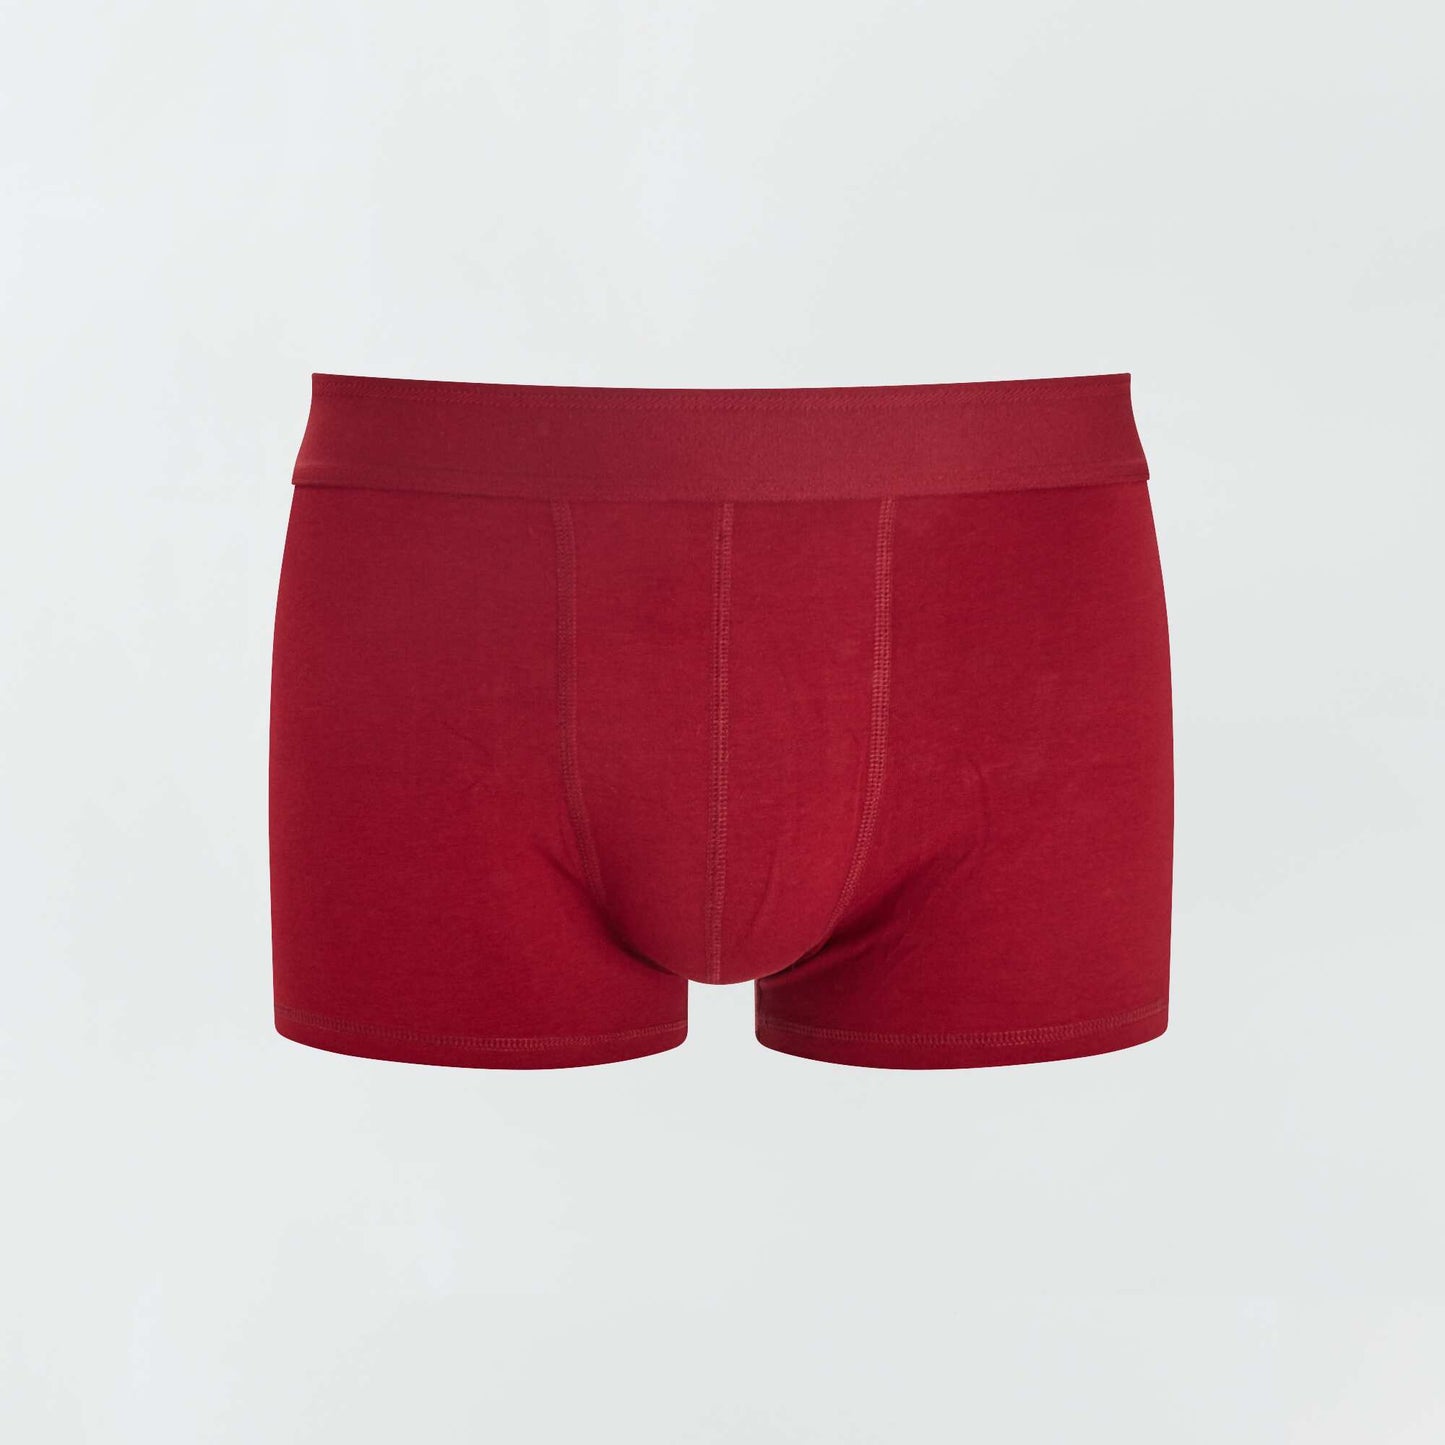 Pack of 3 plain boxers BLUE/grey/red